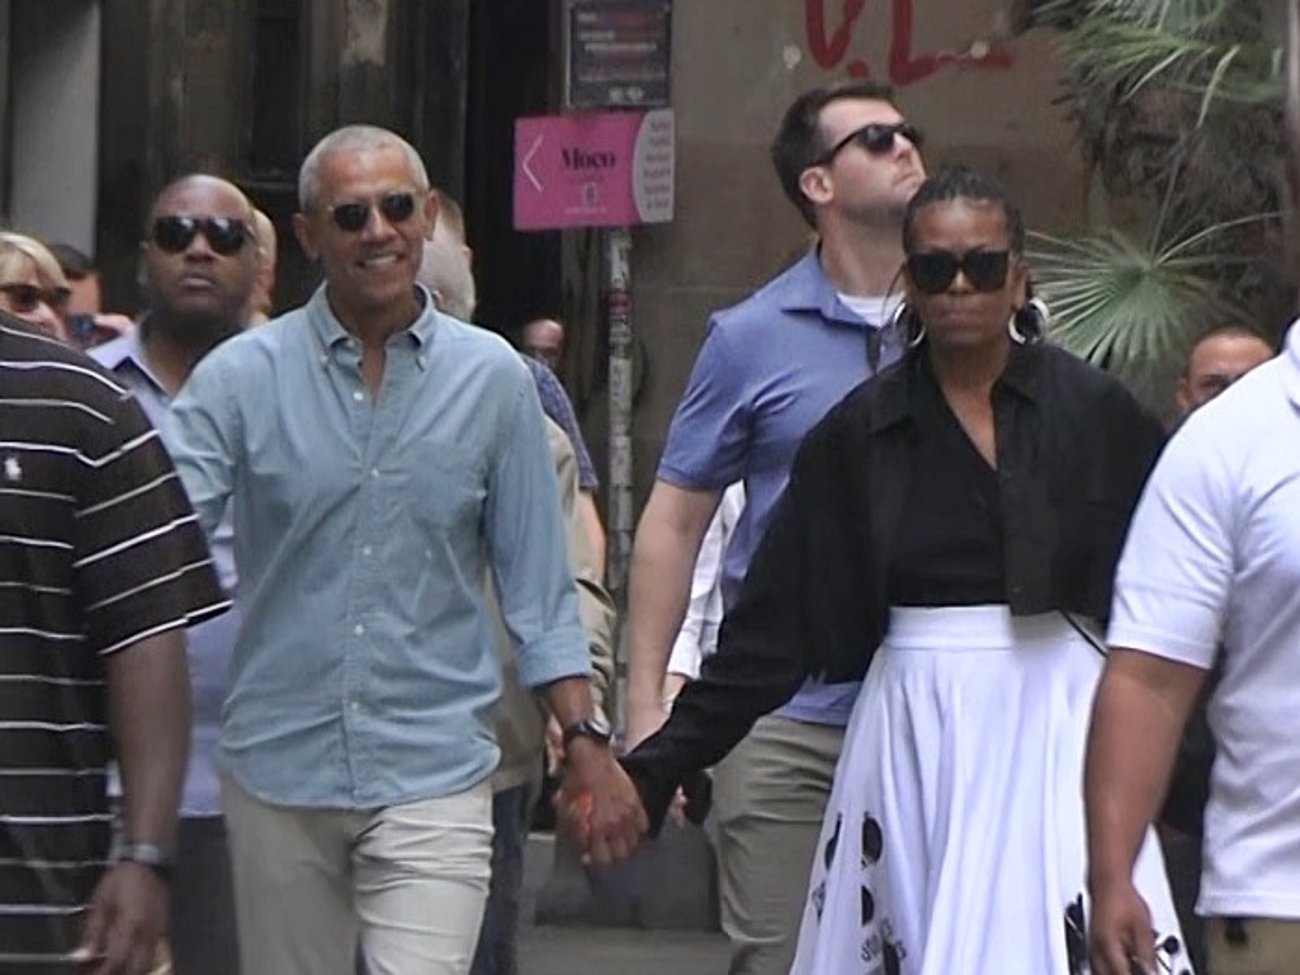 Barack and Michelle Obama: romance in the City of Barcelona